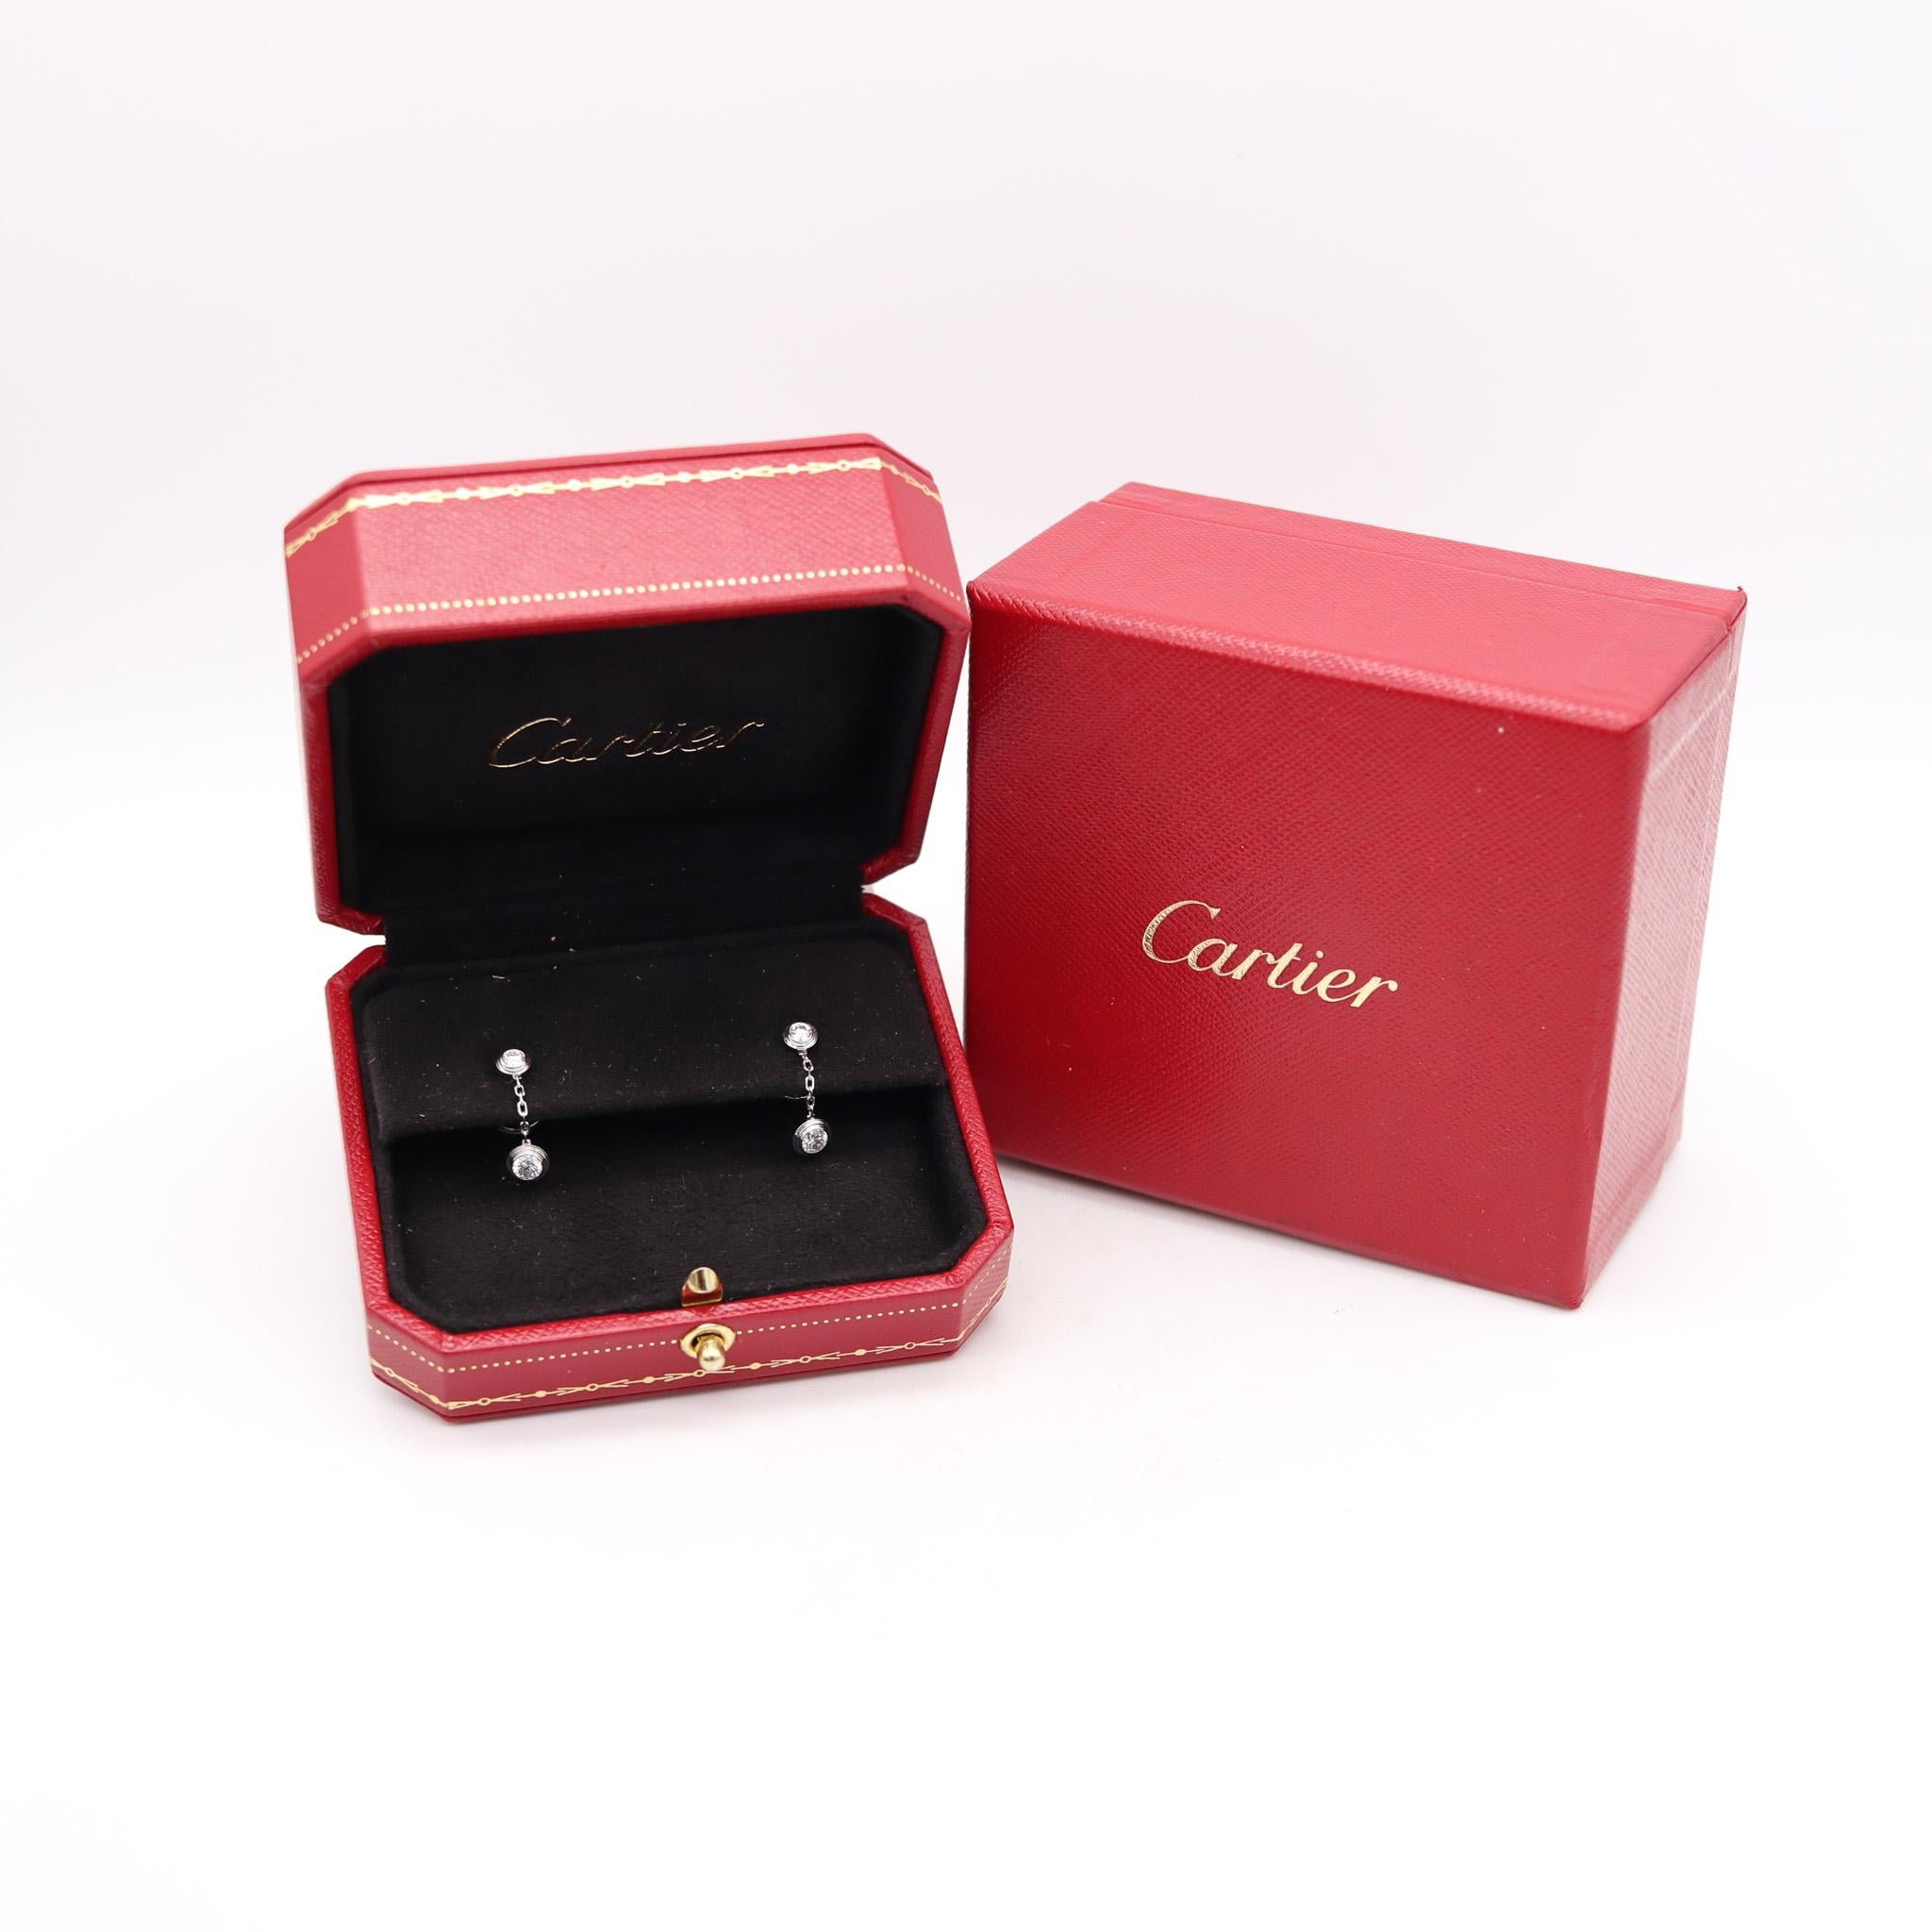 D'Amour dangle drop earrings designed by Cartier.

Beautiful contemporary dangle drop earrings, created in Paris France by the jewelry house of Cartier. They are from d'amour collection and was crafted in solid white gold of 18 karats with high